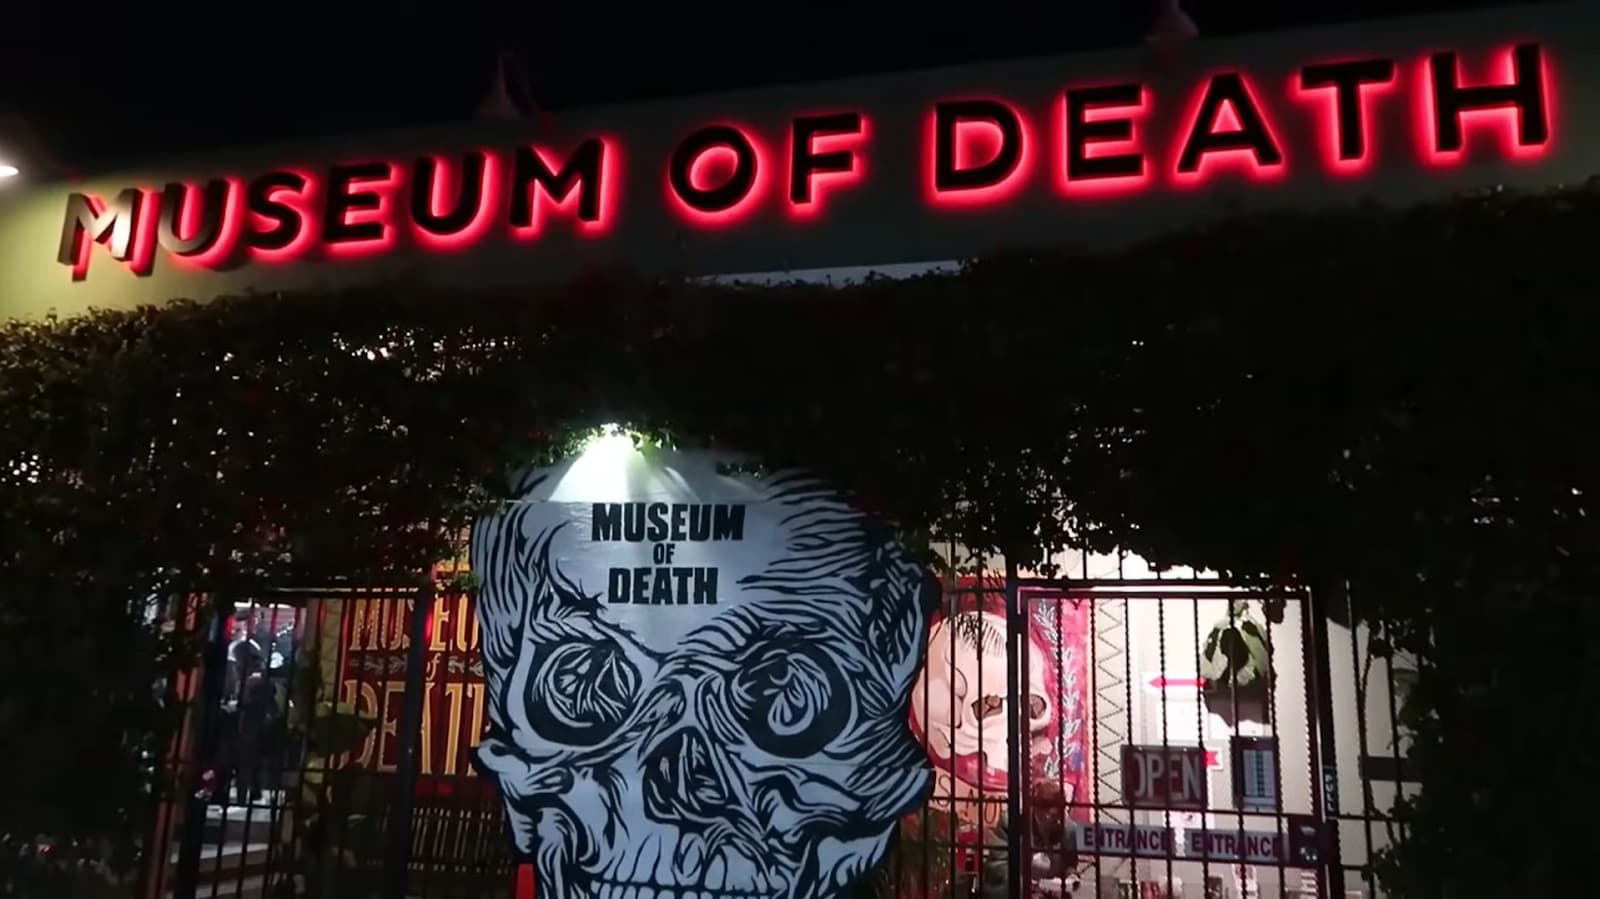 A Tour of the Museum of Death